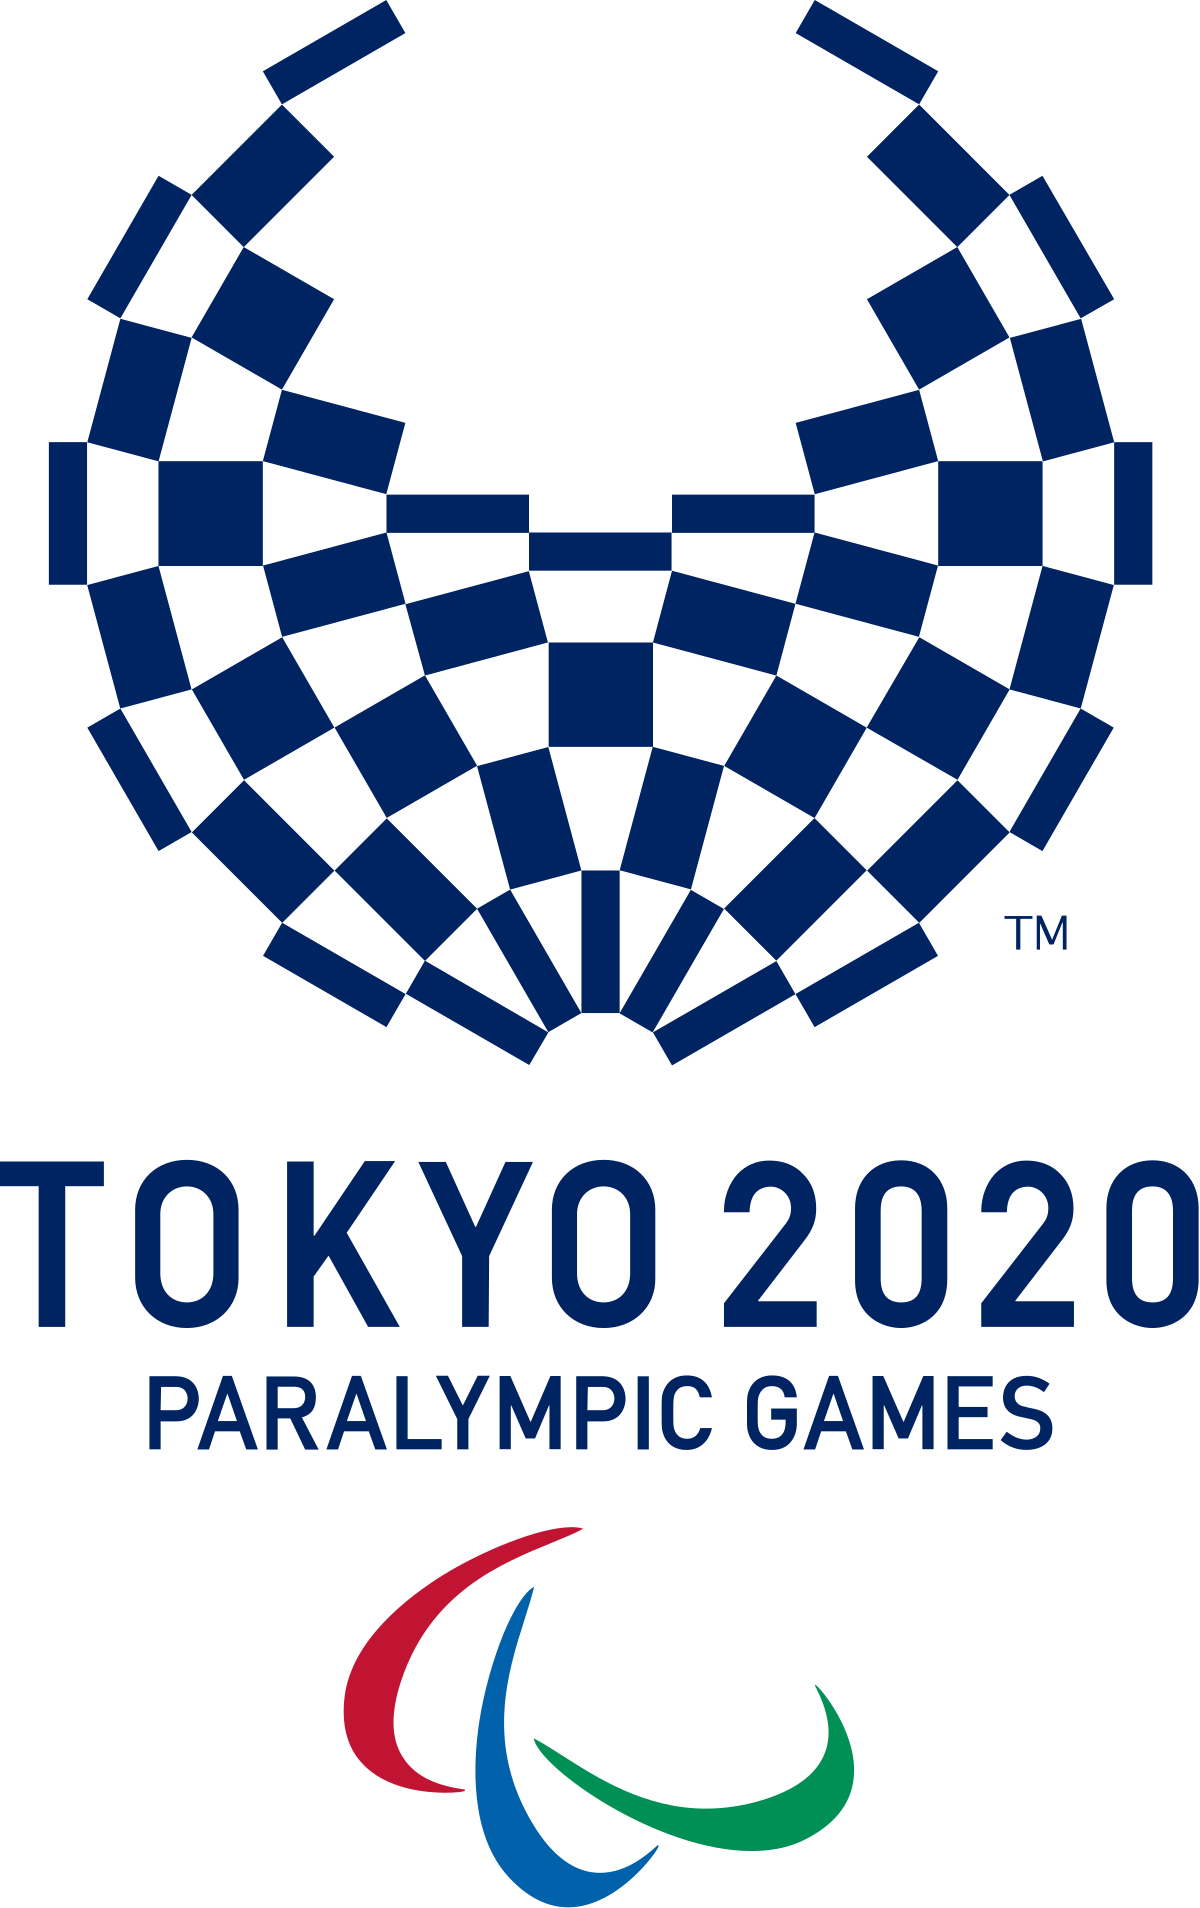 paralympic_games PREPARING FOR THE 2020 TOKYO PARALYMPIC GAMES - Jack Lingo REALTOR